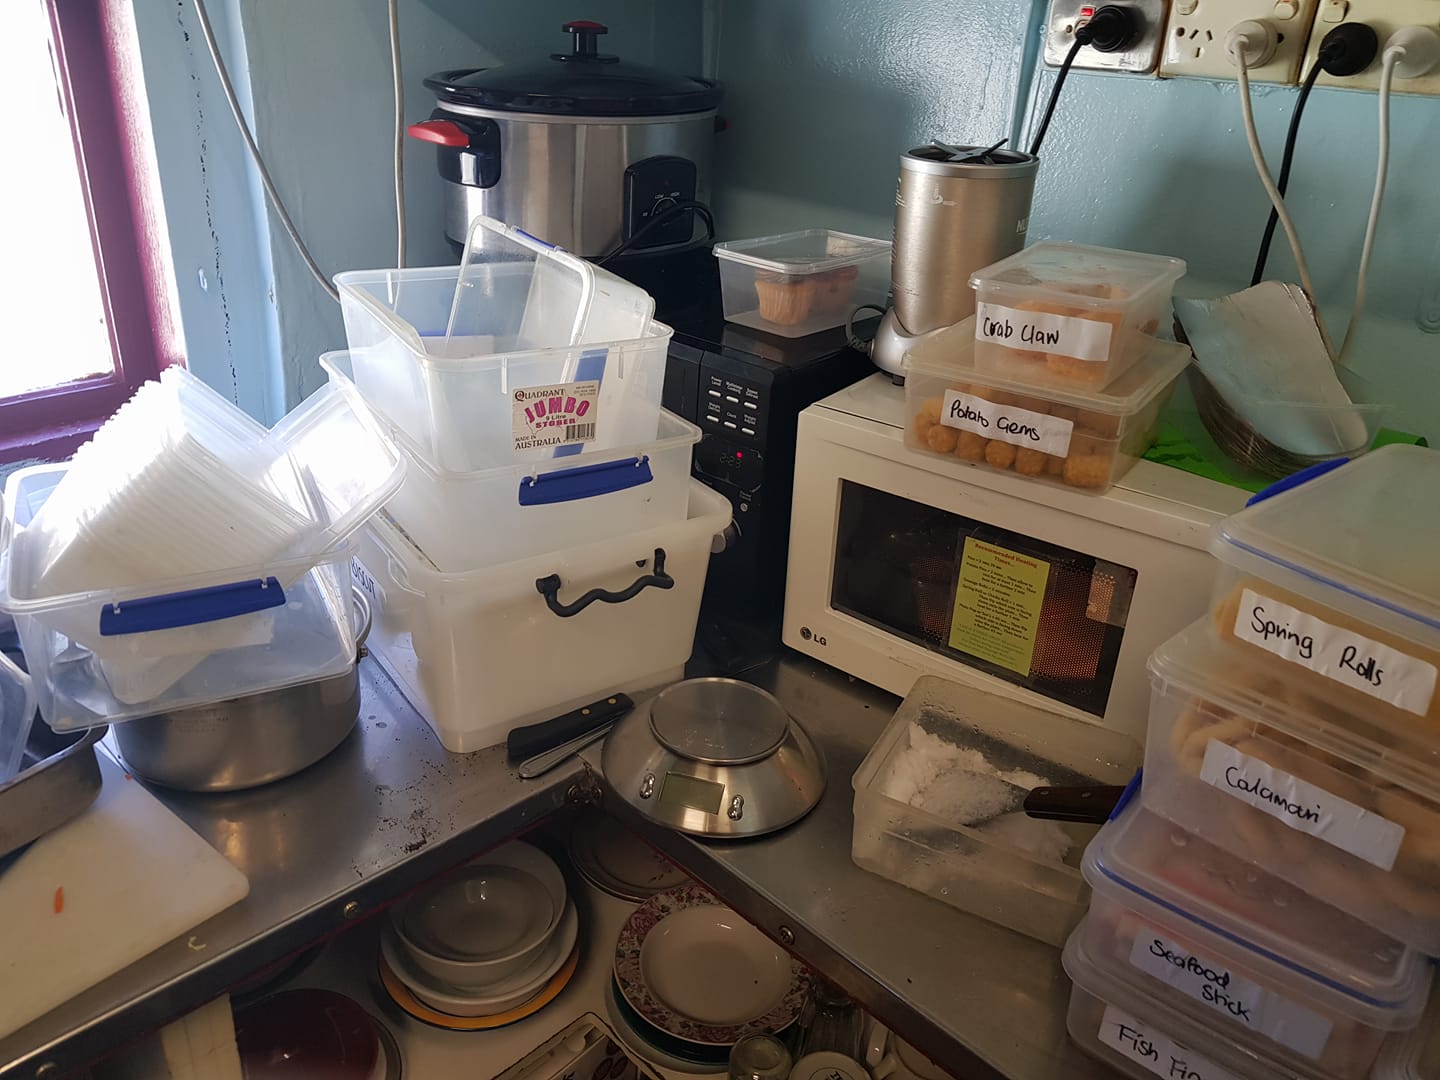 Mess of a kitchen. Cleaning up personal bowls plates the owner and her family use. They just dump it all there, workers clean up after them all..jpg